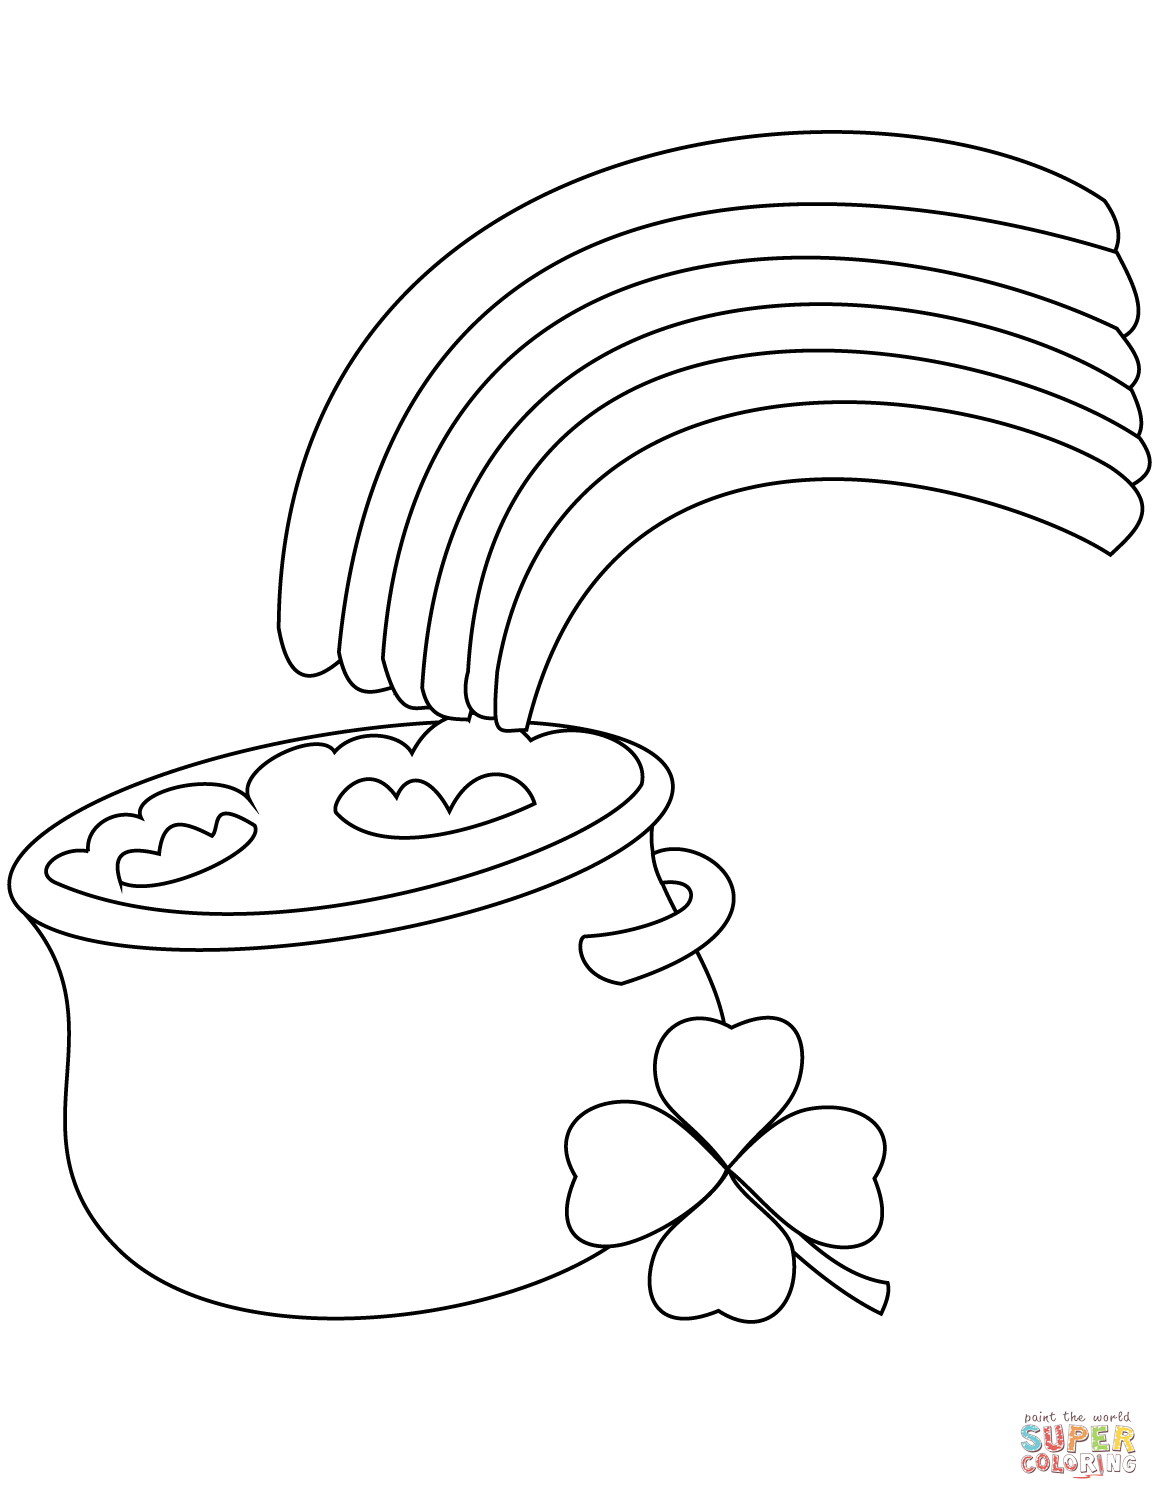 Rainbow and Pot of Gold coloring page | Free Printable Coloring Pages